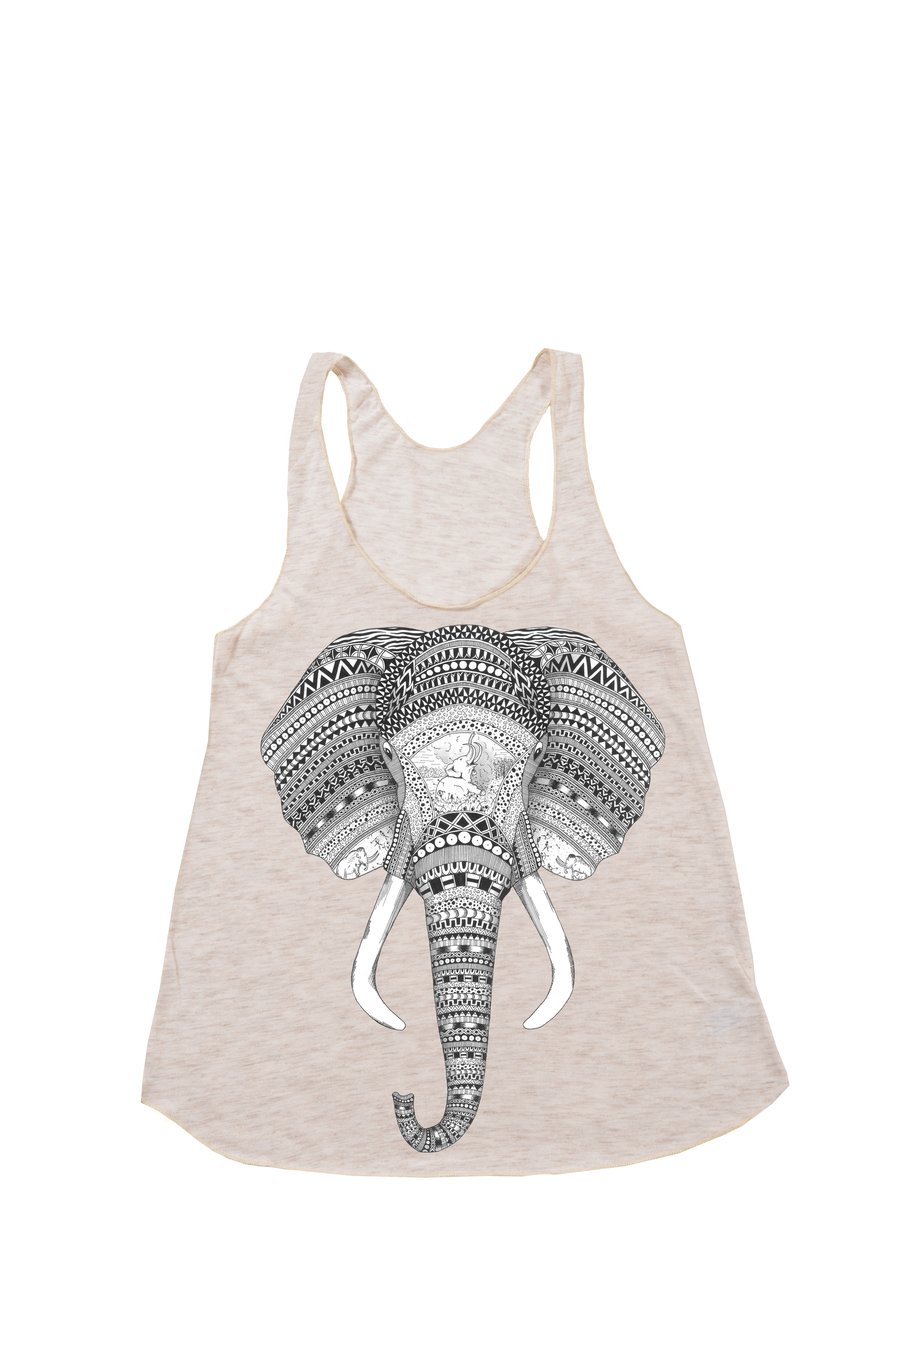 Image of "An Elephant Never Forgets" Racerback Tank